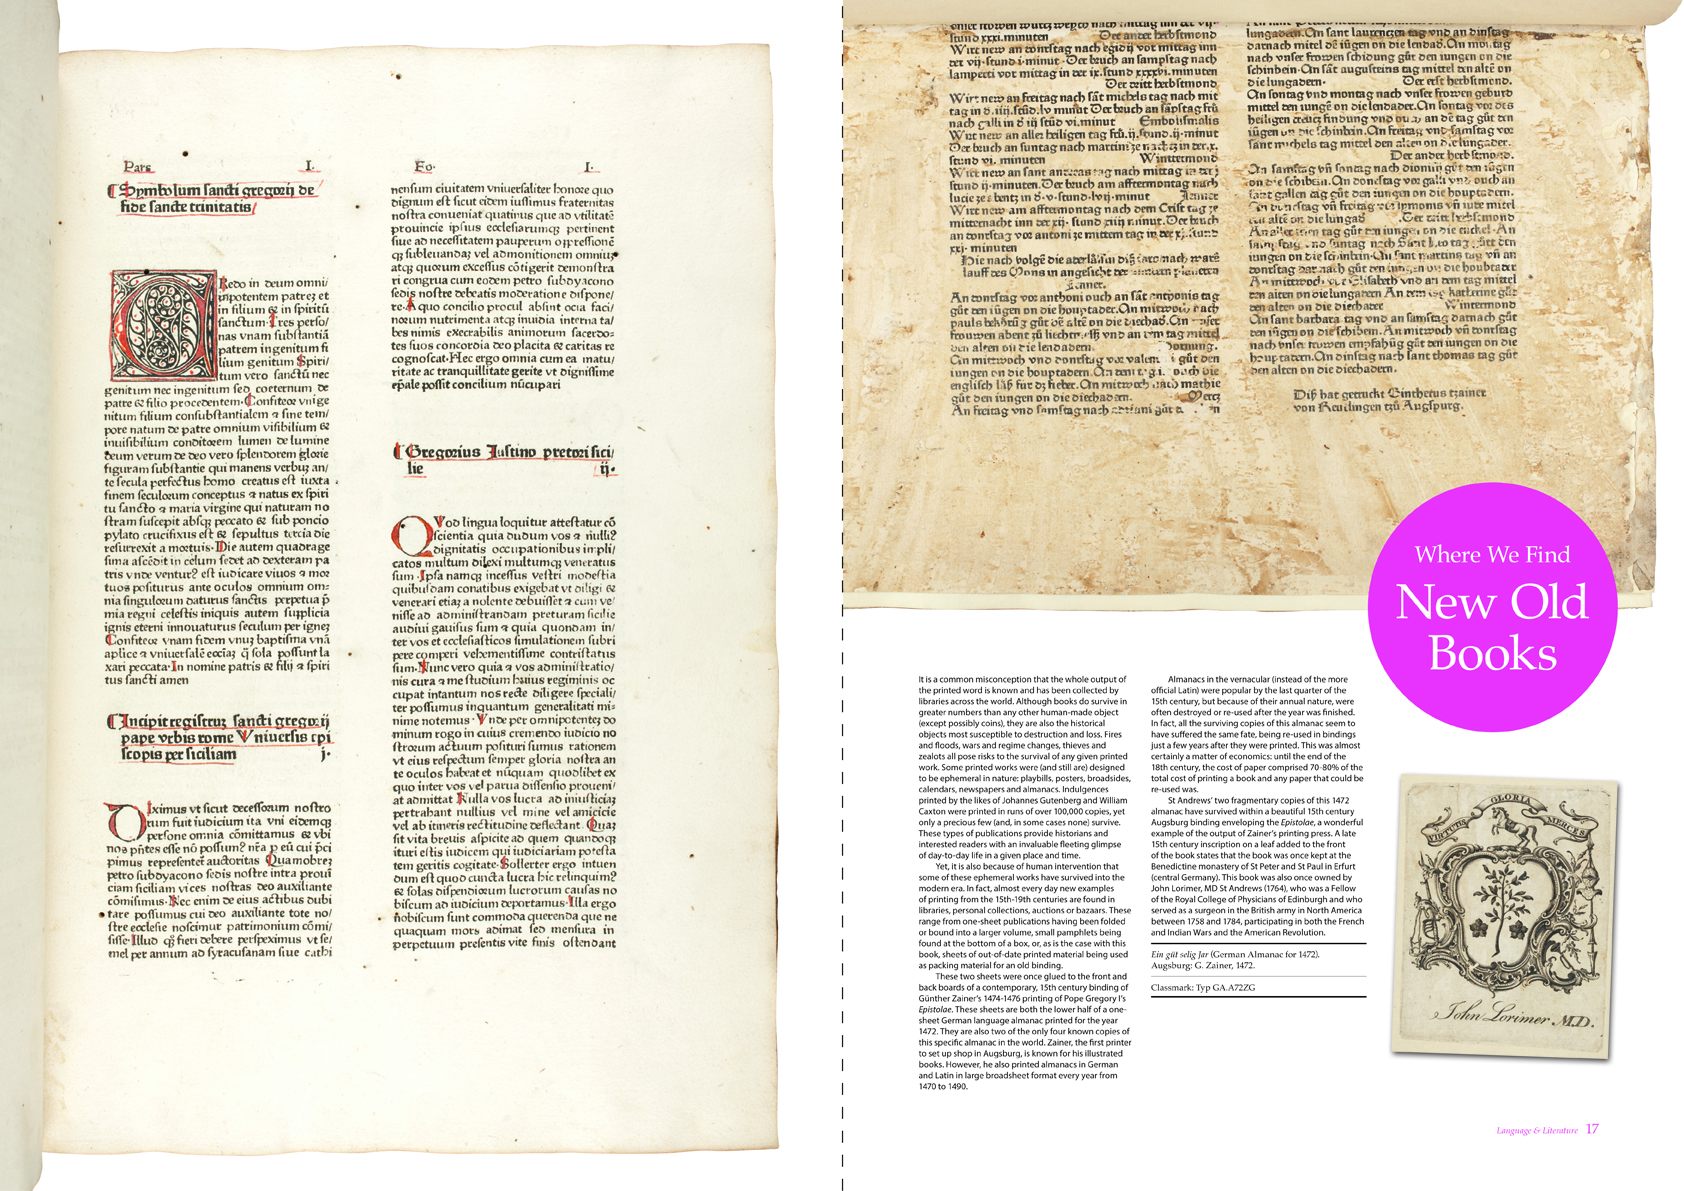 Issue 3_600 Years of Book Collecting_Language & Literature PRINTERS FINAL-11